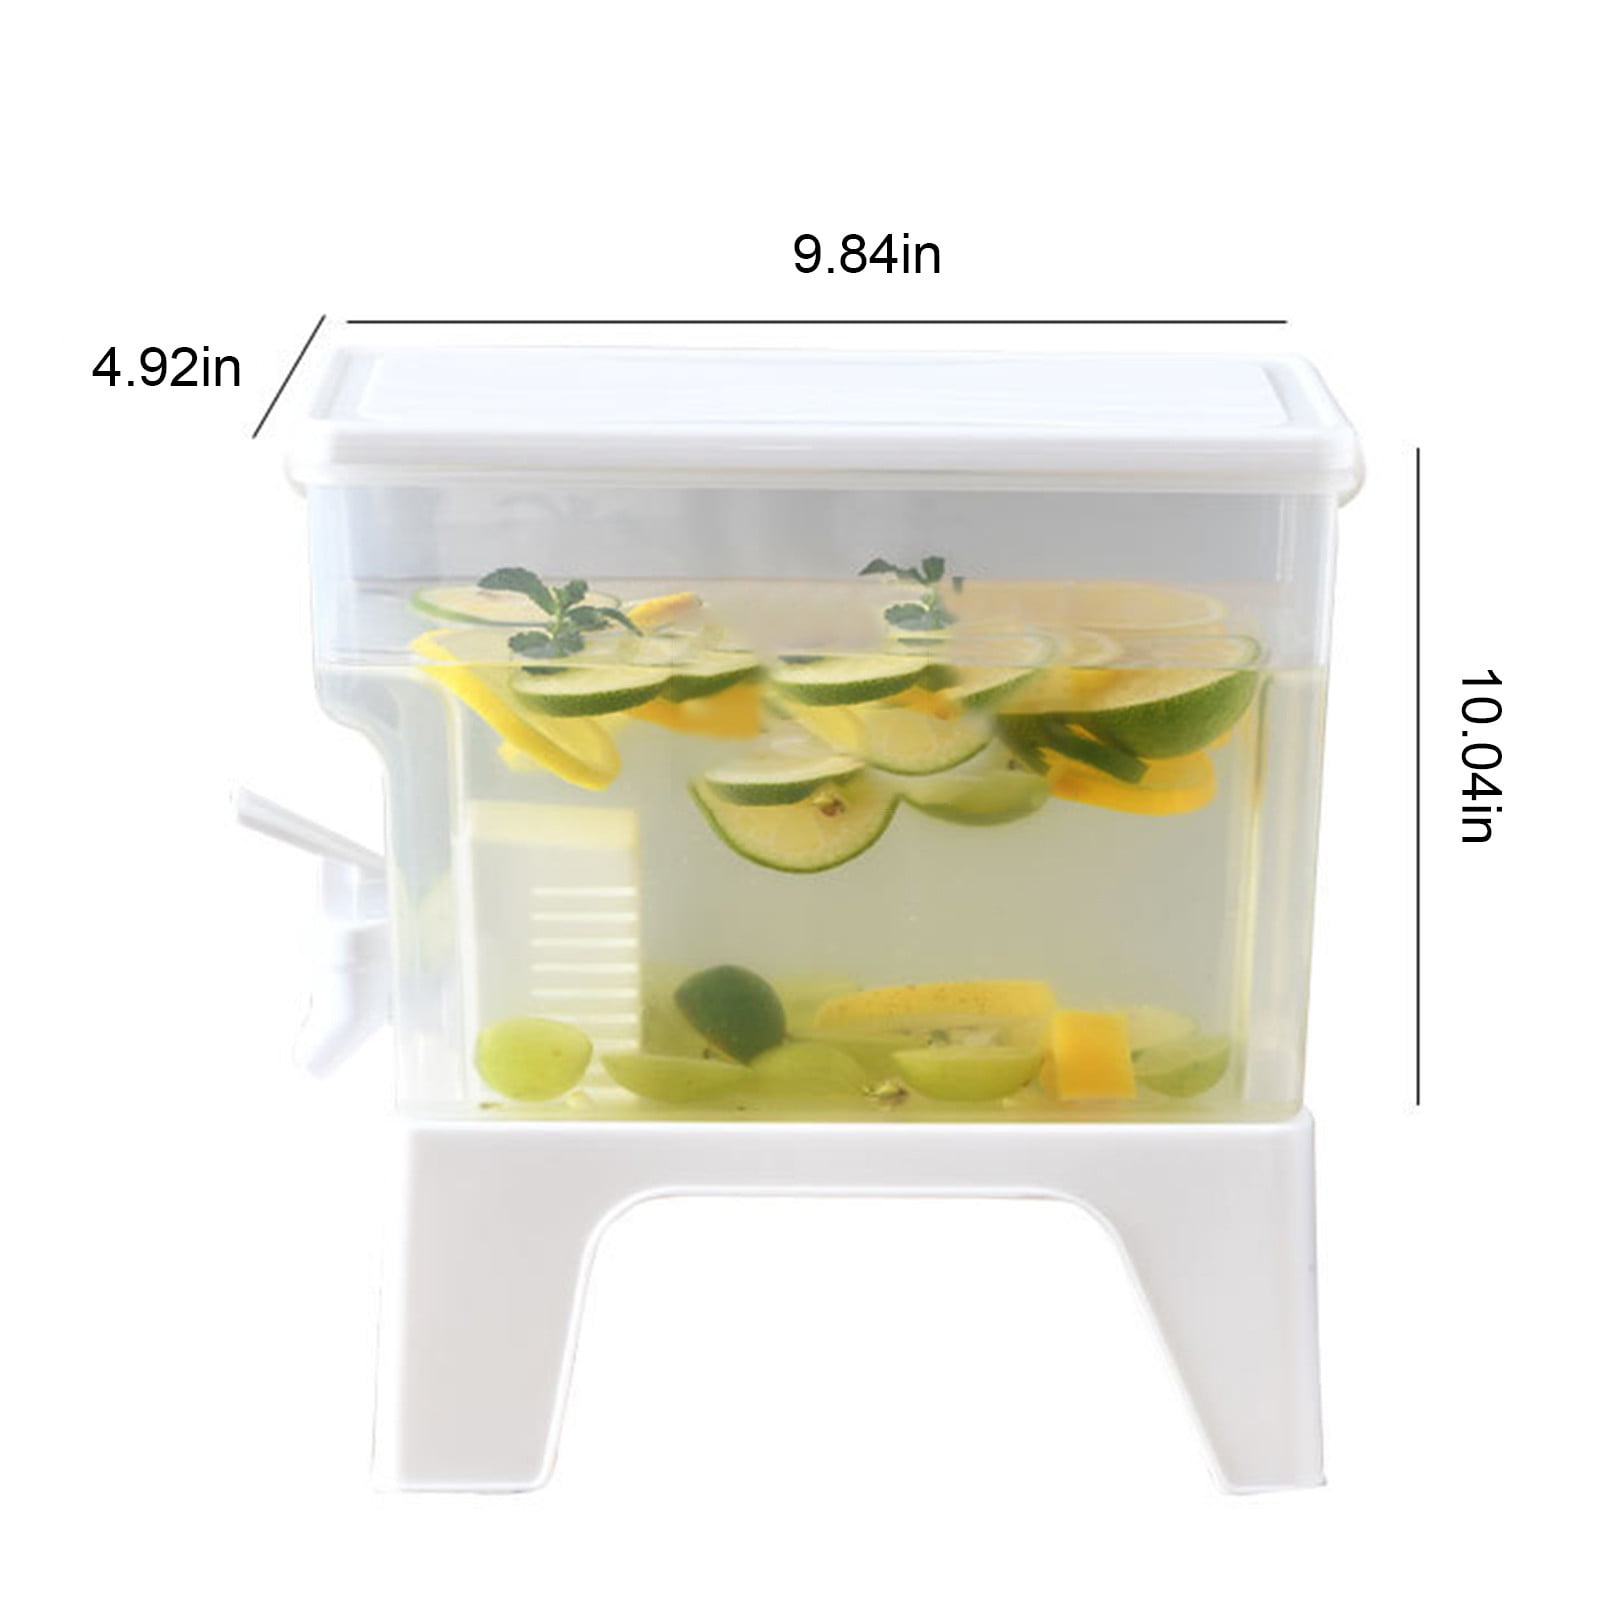 Ouerper Small Water Dispenser，1 Gallon Refrigerator Drinks Dispenser With  Spigot， Juice Containers For Parties, Home Parties And Daily Use(1pc)